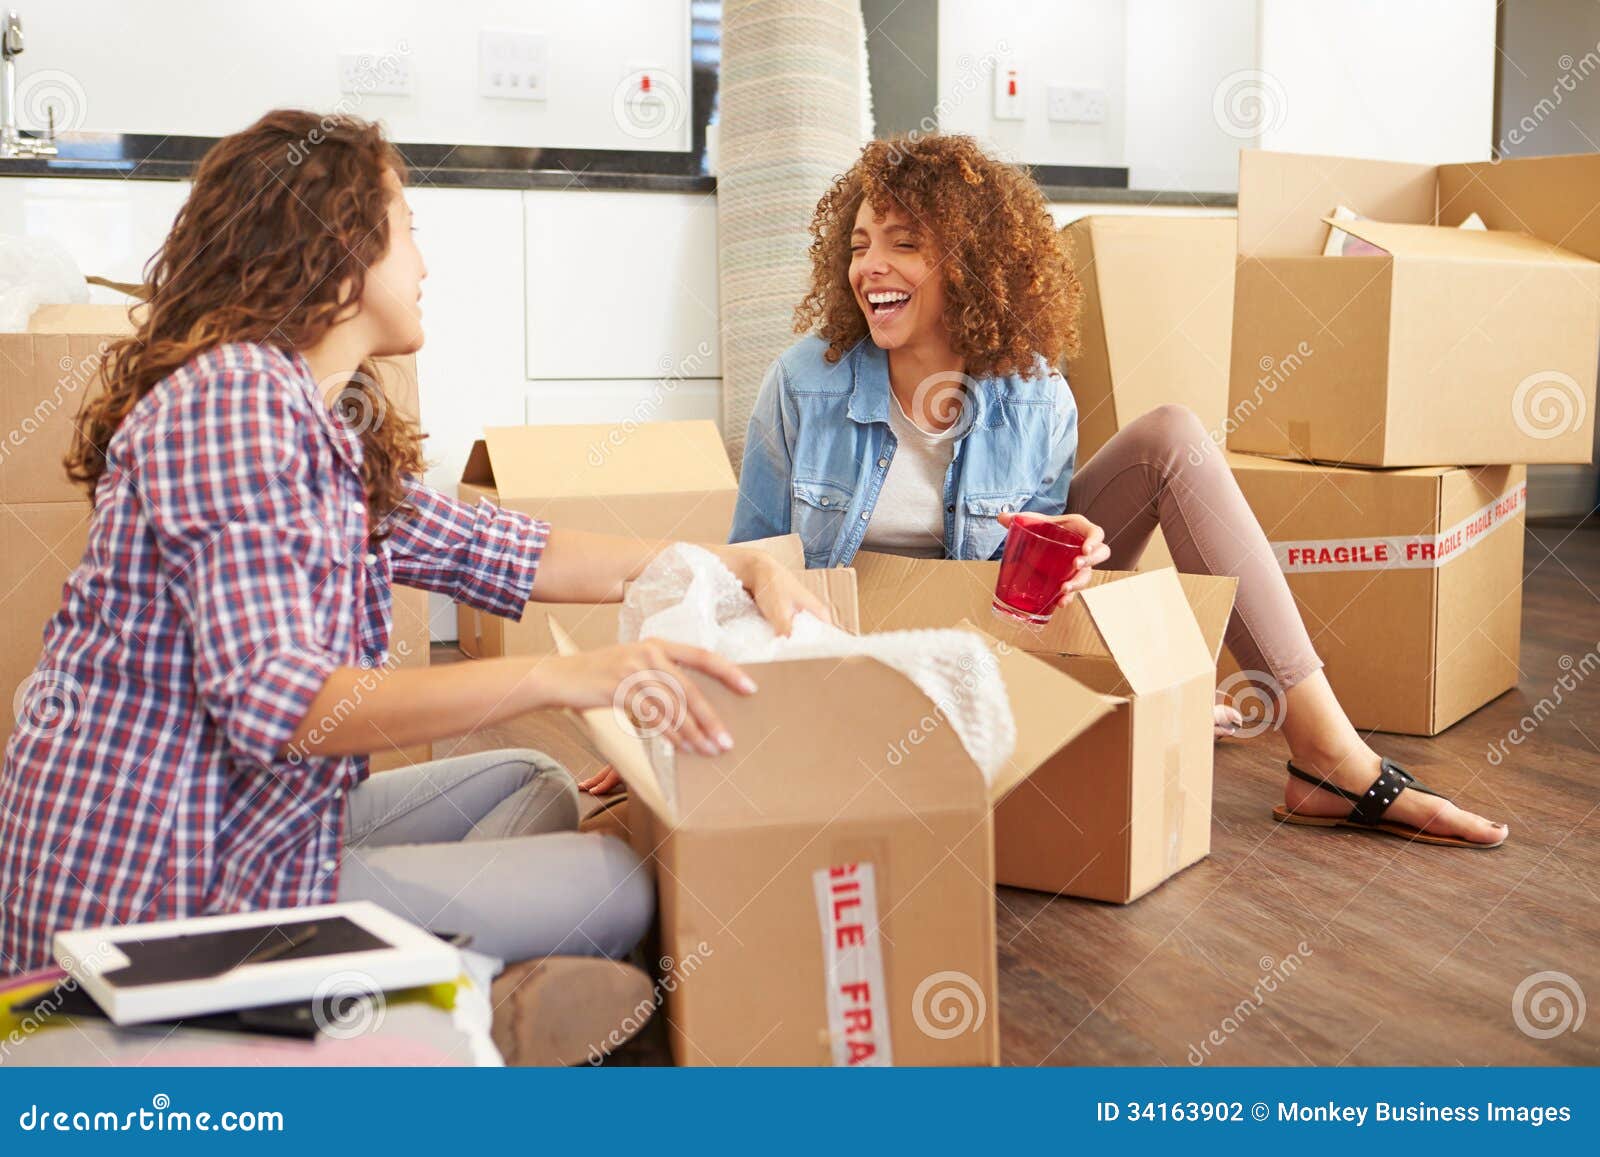 Two Women Moving Into New Home And Unpacking Boxes Royalty-Free Stock